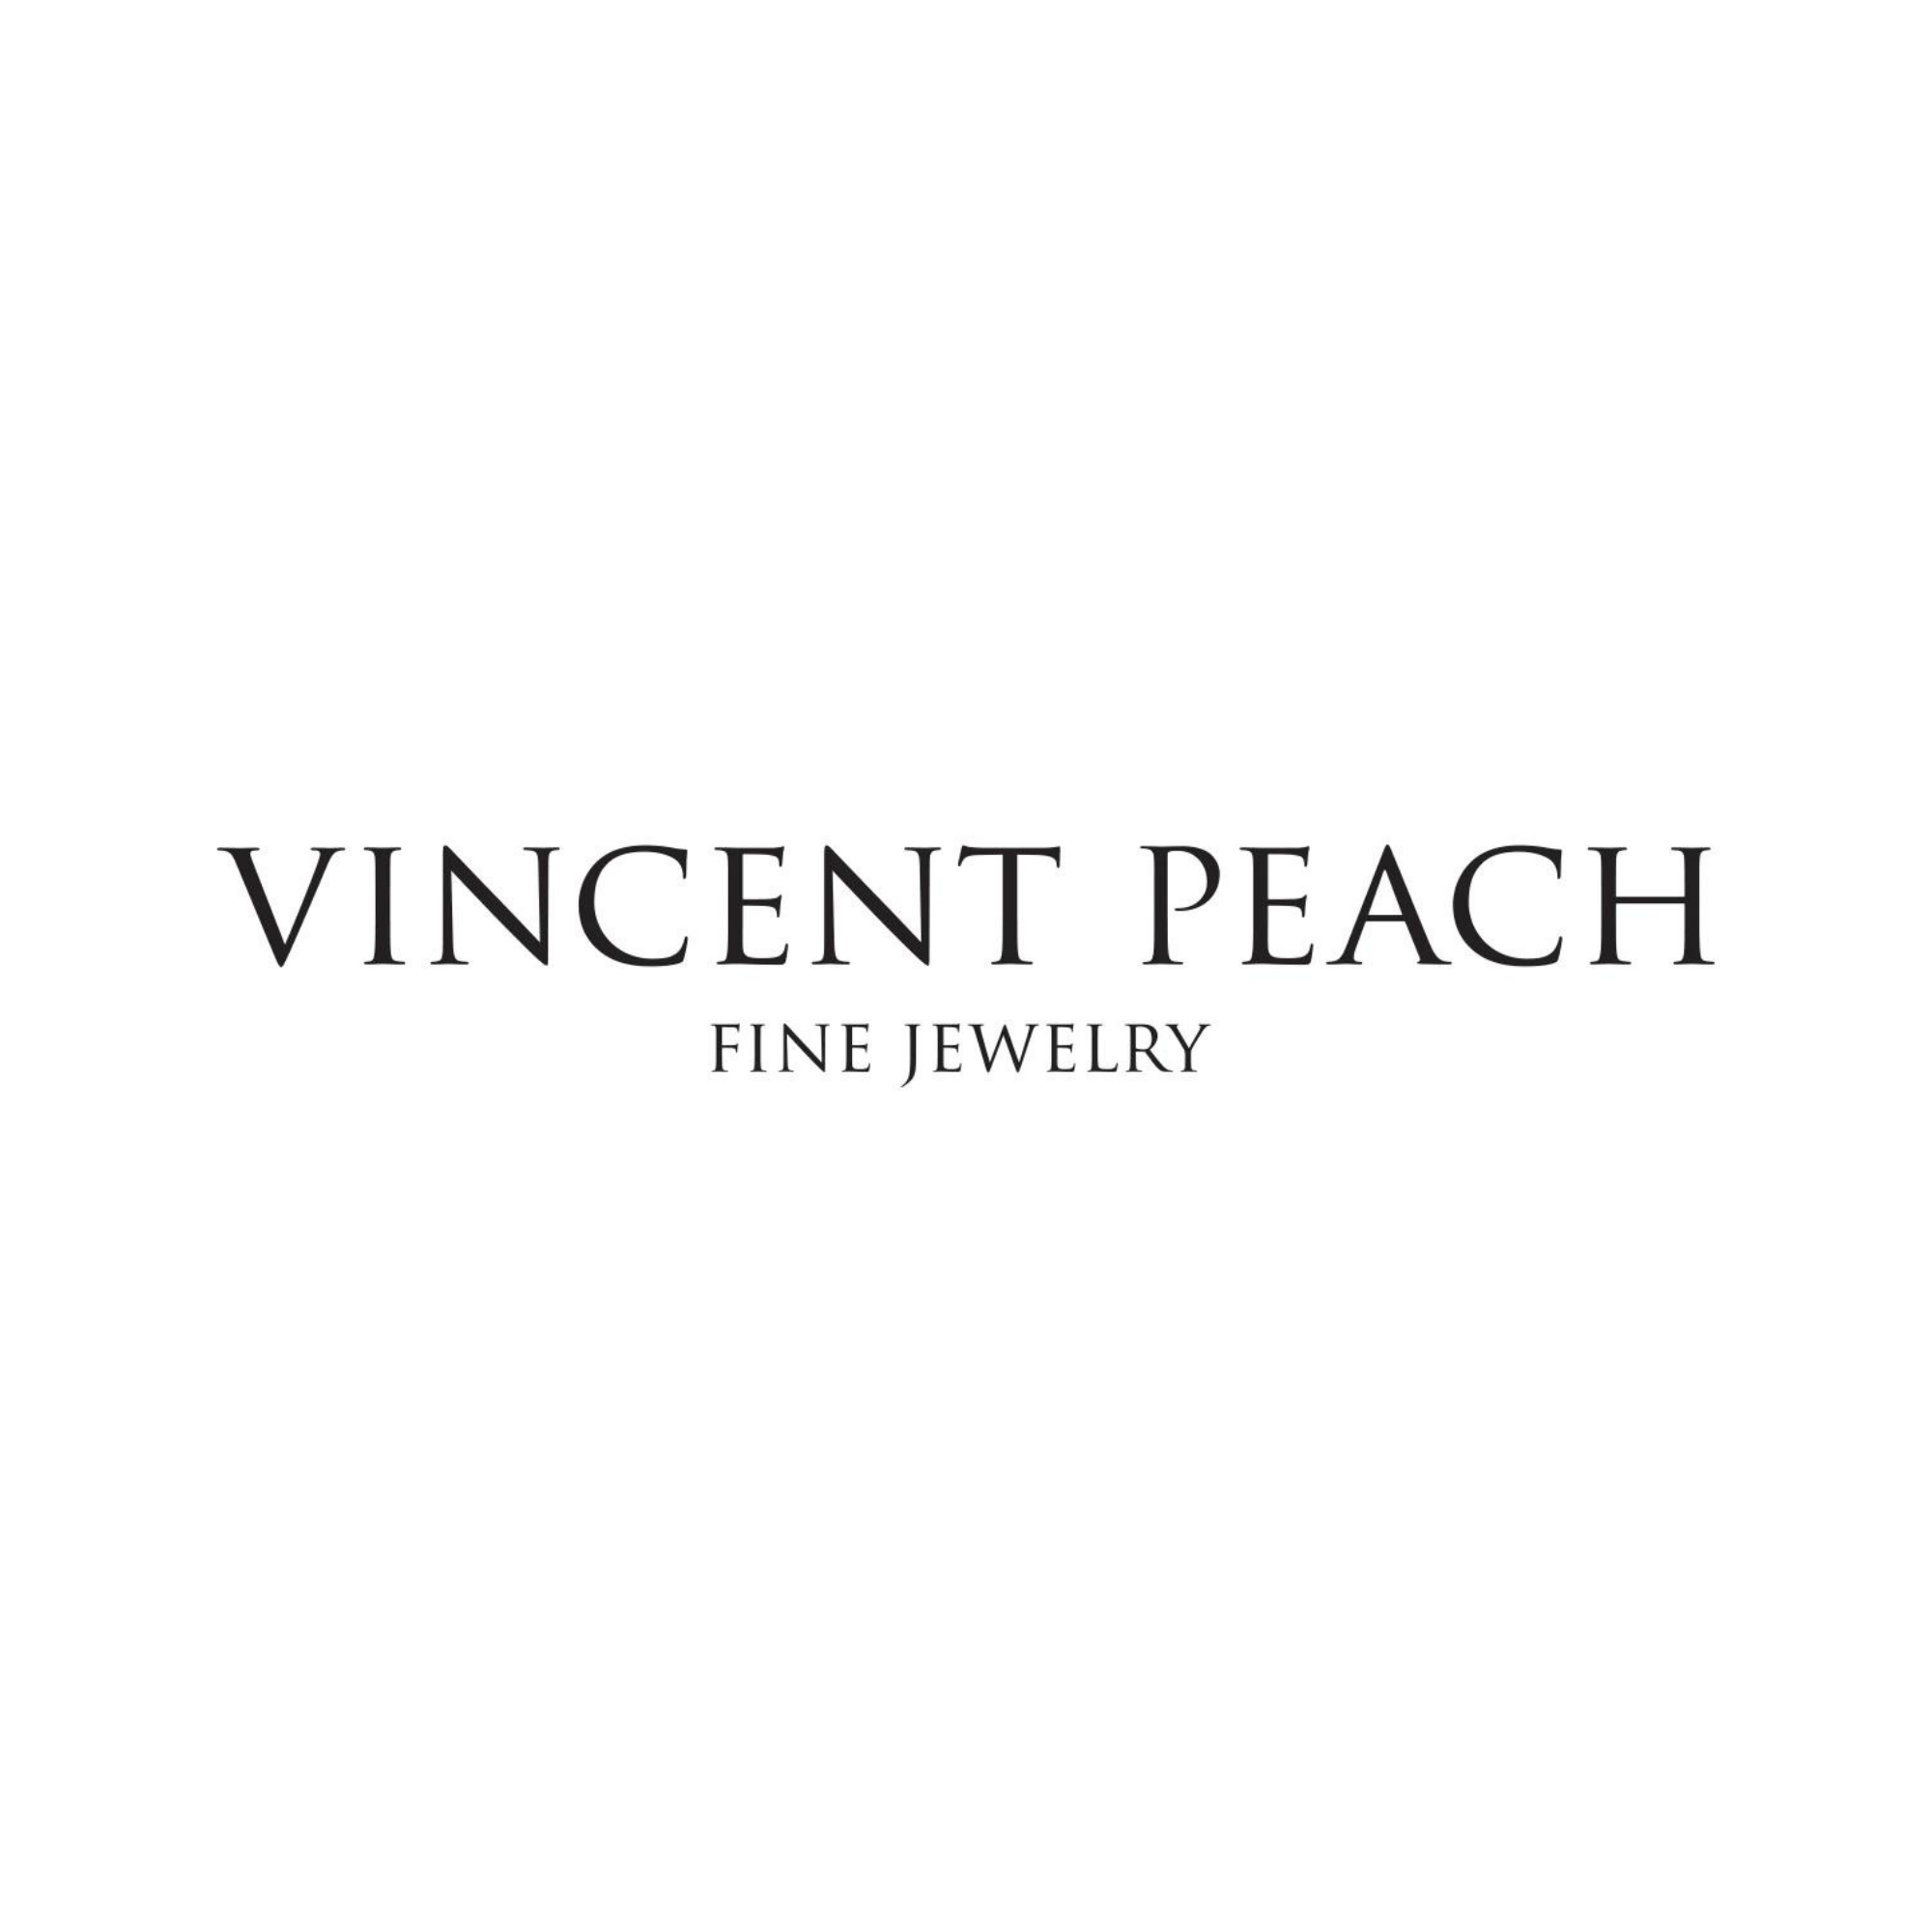 Vincent Peach jewelry at Henne Jewelers